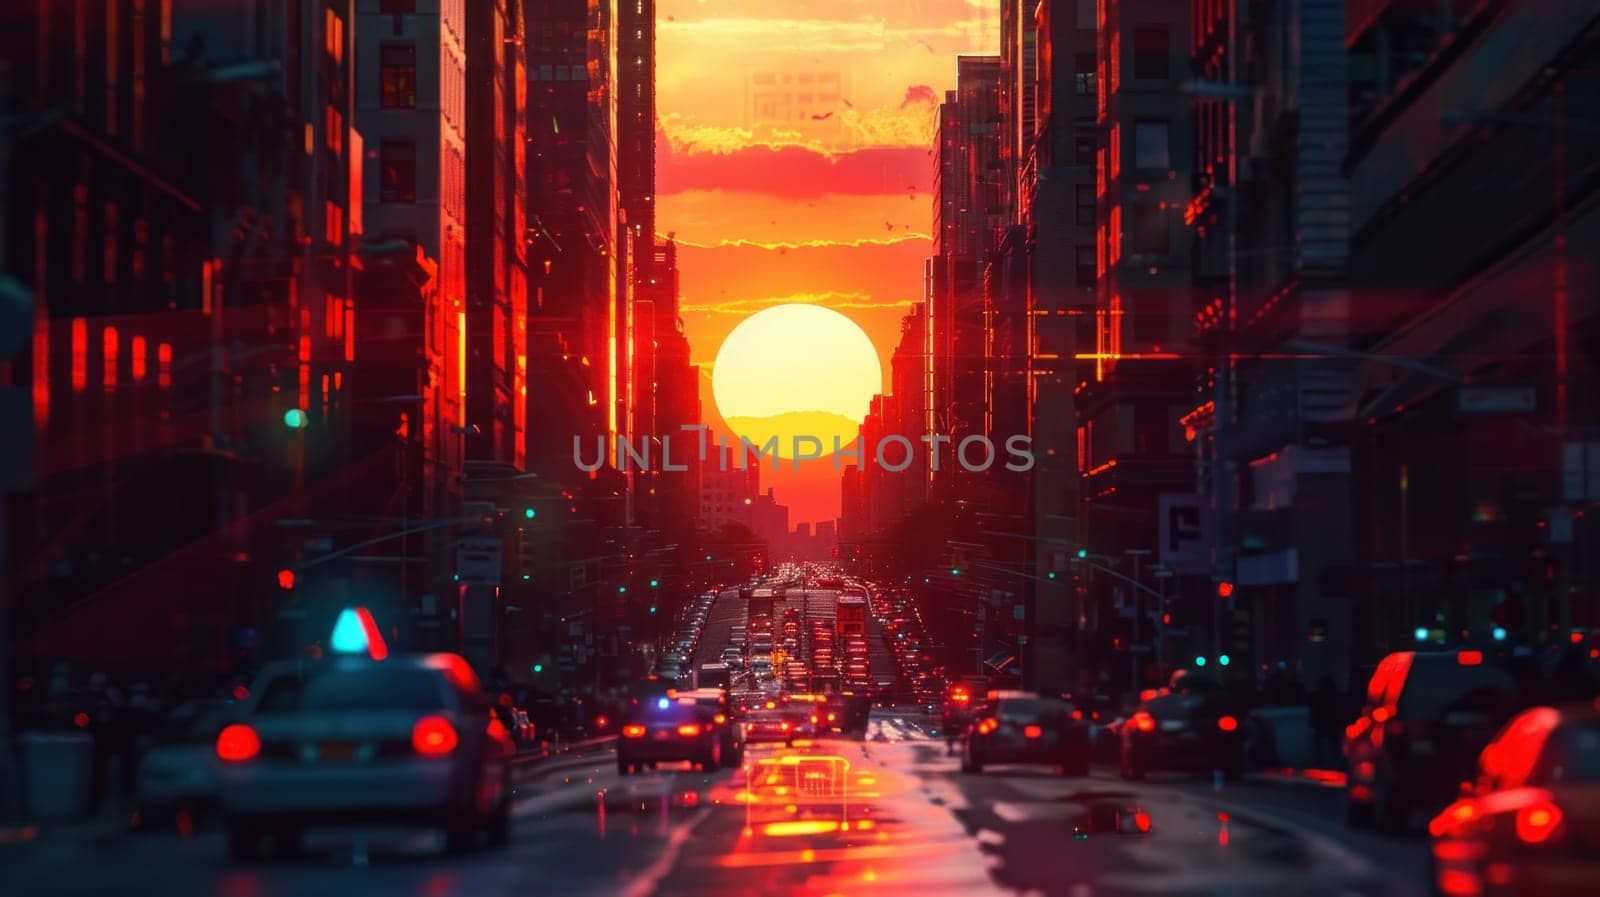 A city street with cars and a large sun in the sky.